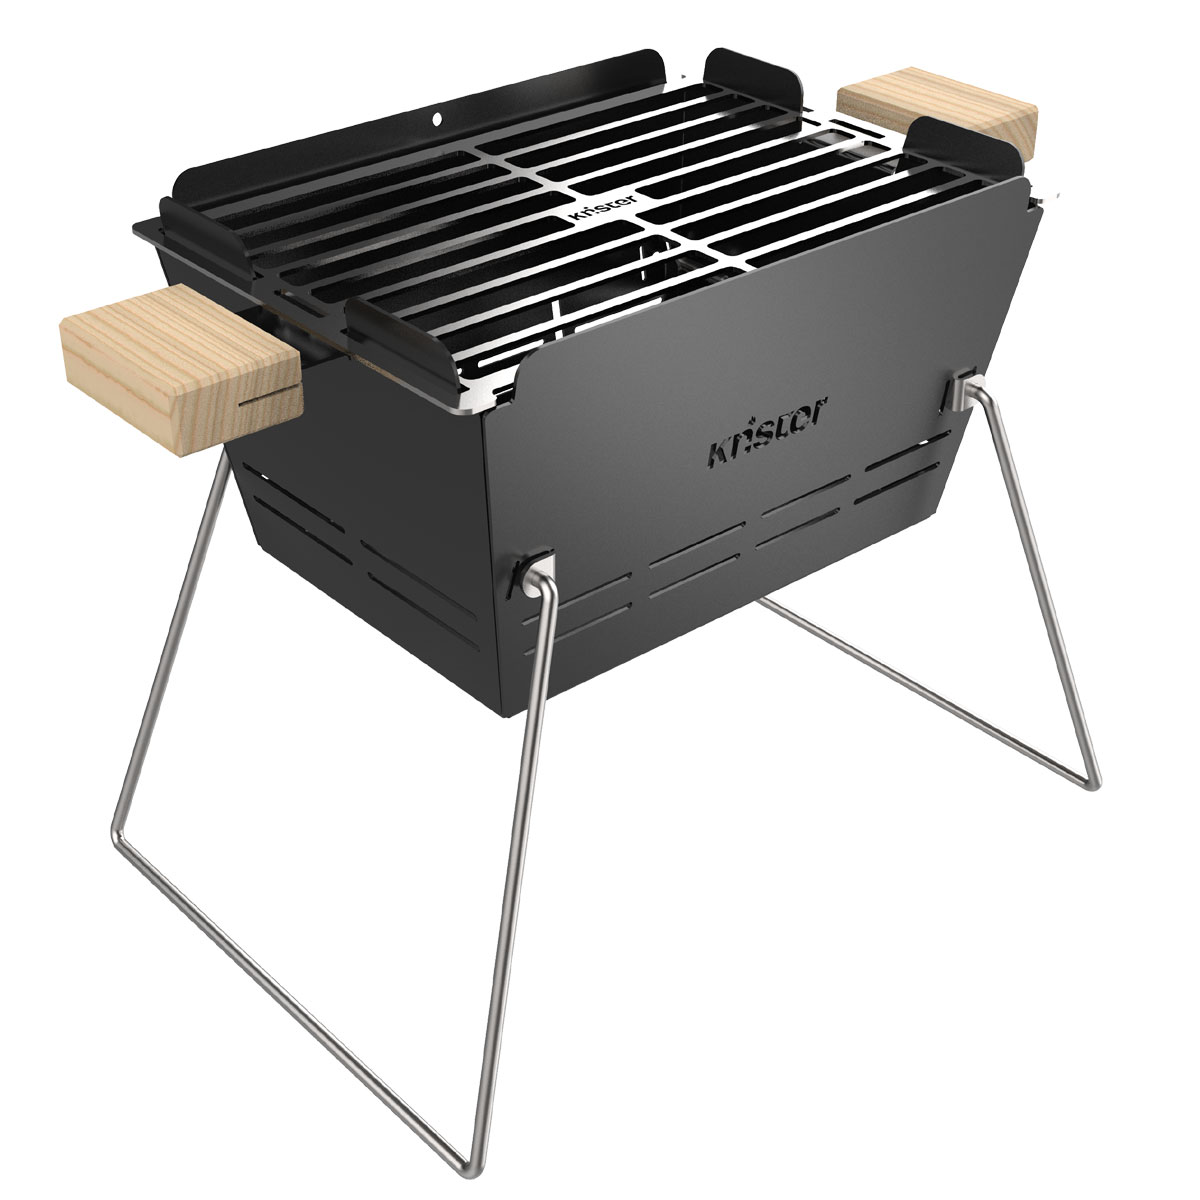 Knister Grill Small – tragbarer Holzkohlegrill